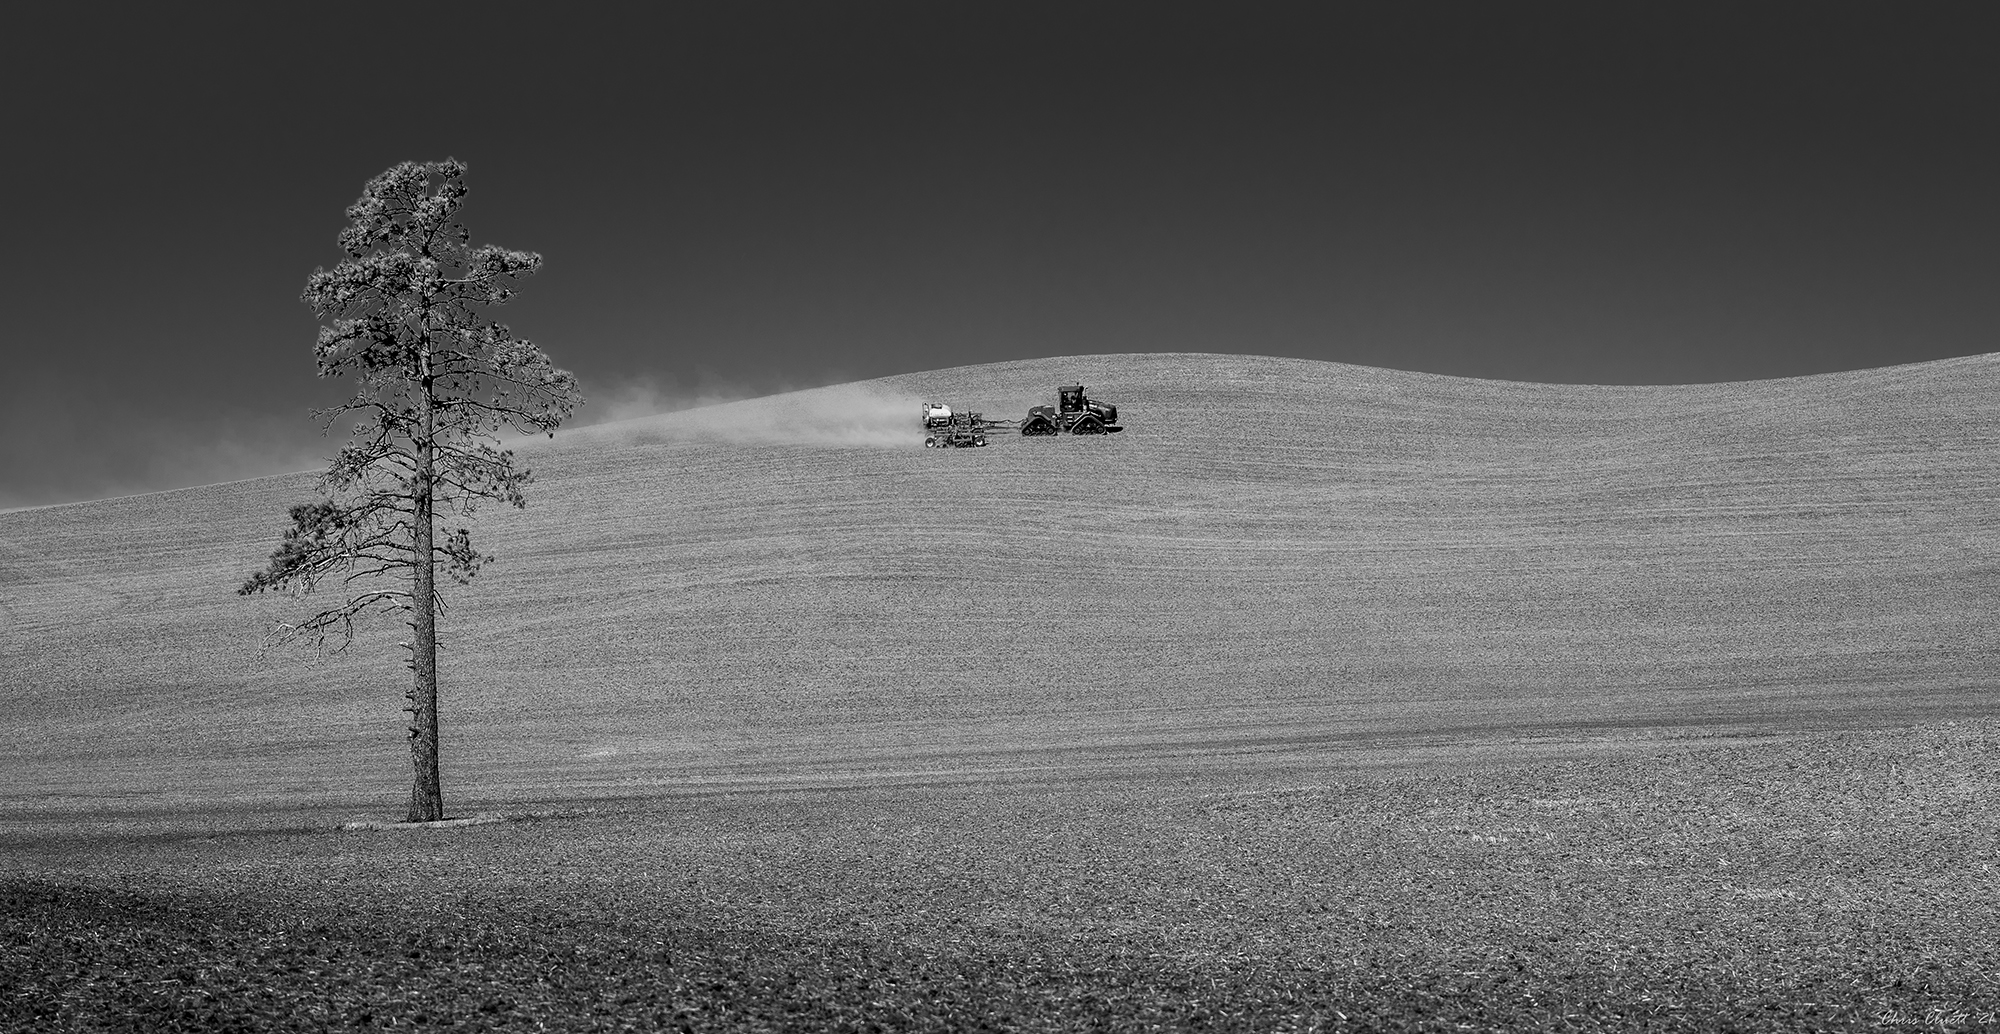 Alone in the endless rolling hills of the Palouse.